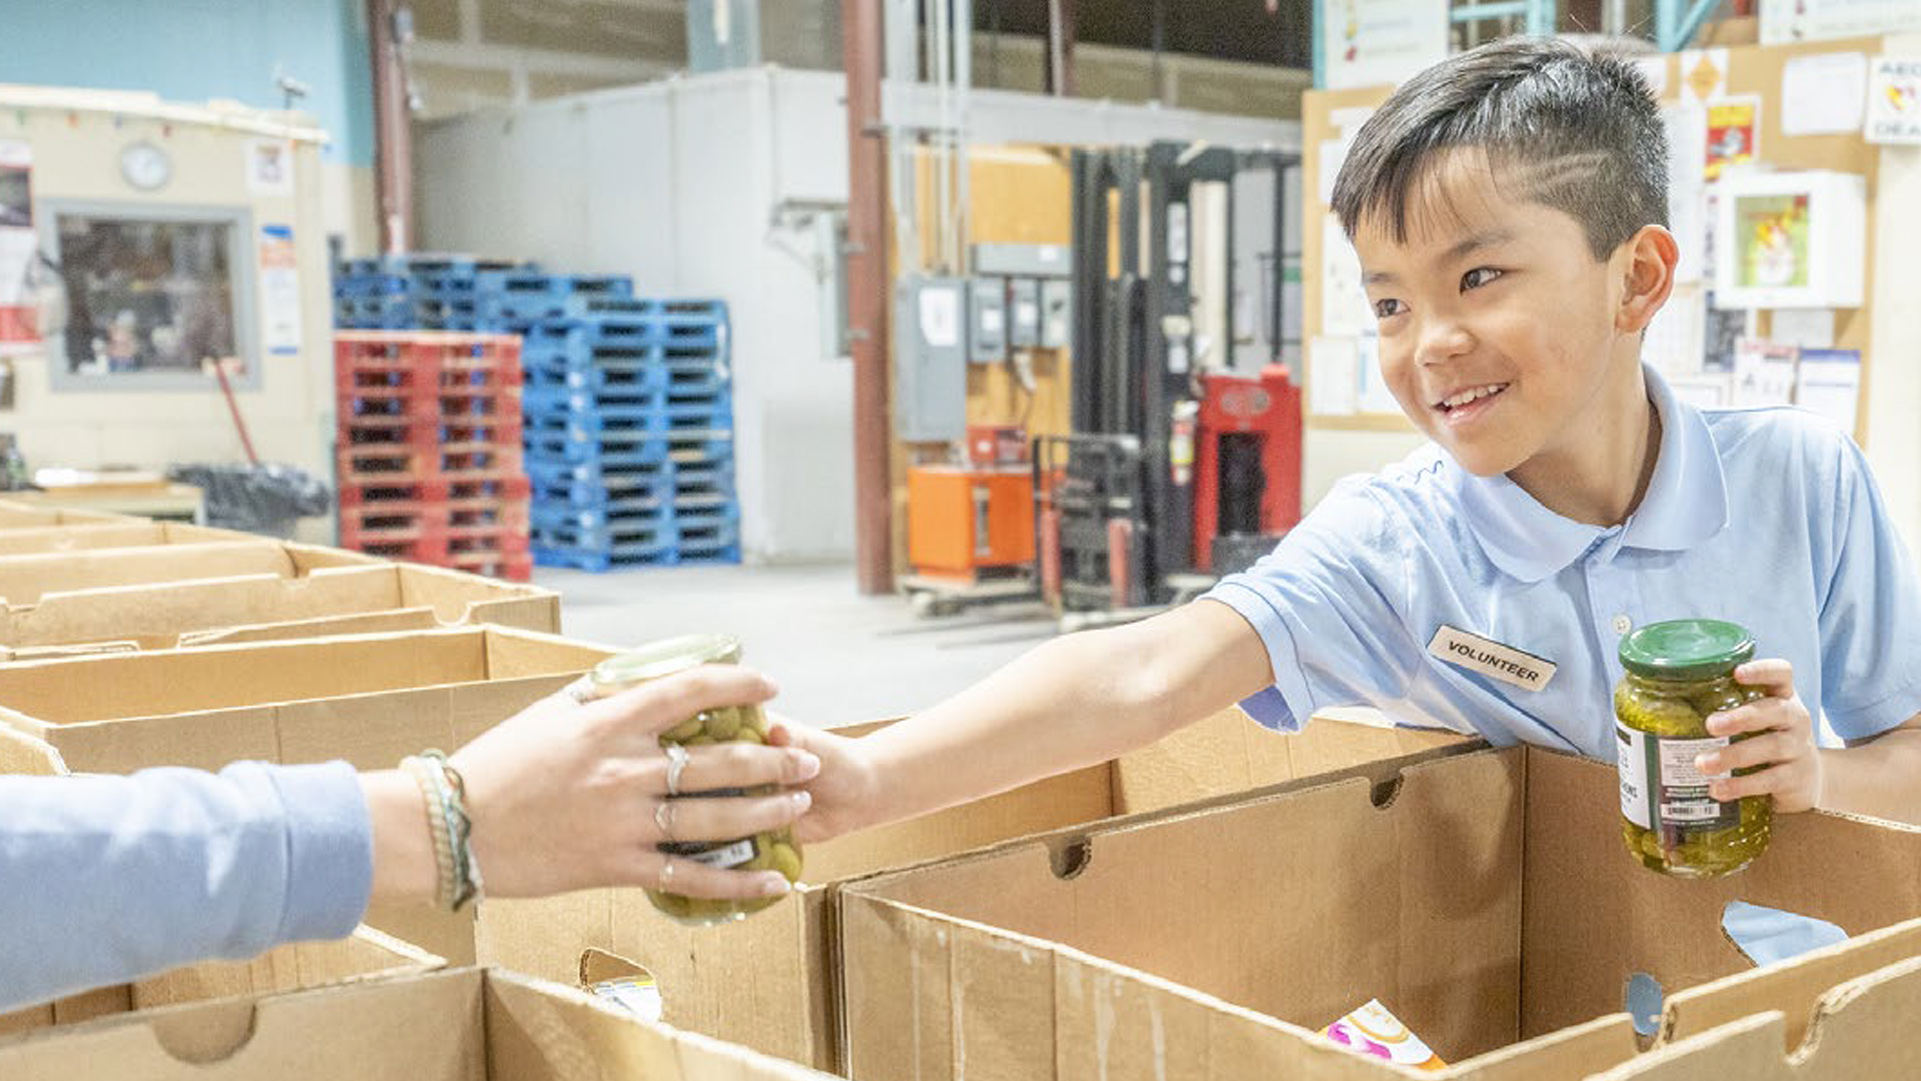 Boy helping package food donations